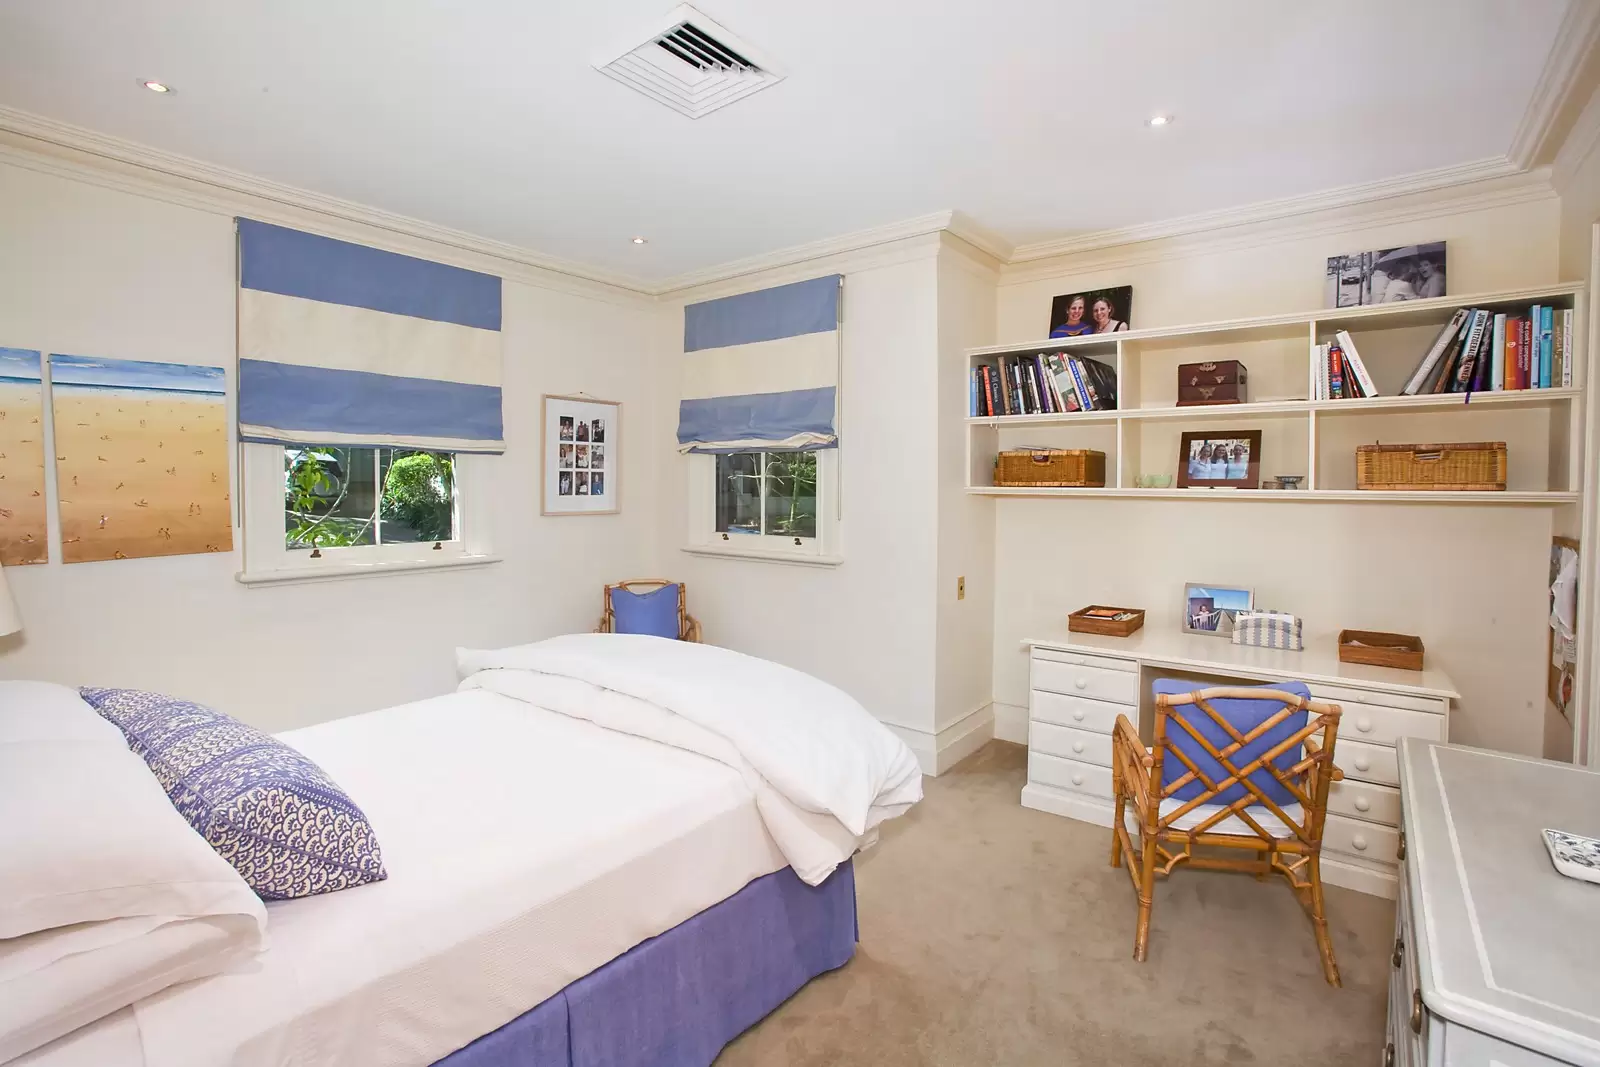 Photo #11: 2 Carrington Avenue, Bellevue Hill - Sold by Sydney Sotheby's International Realty